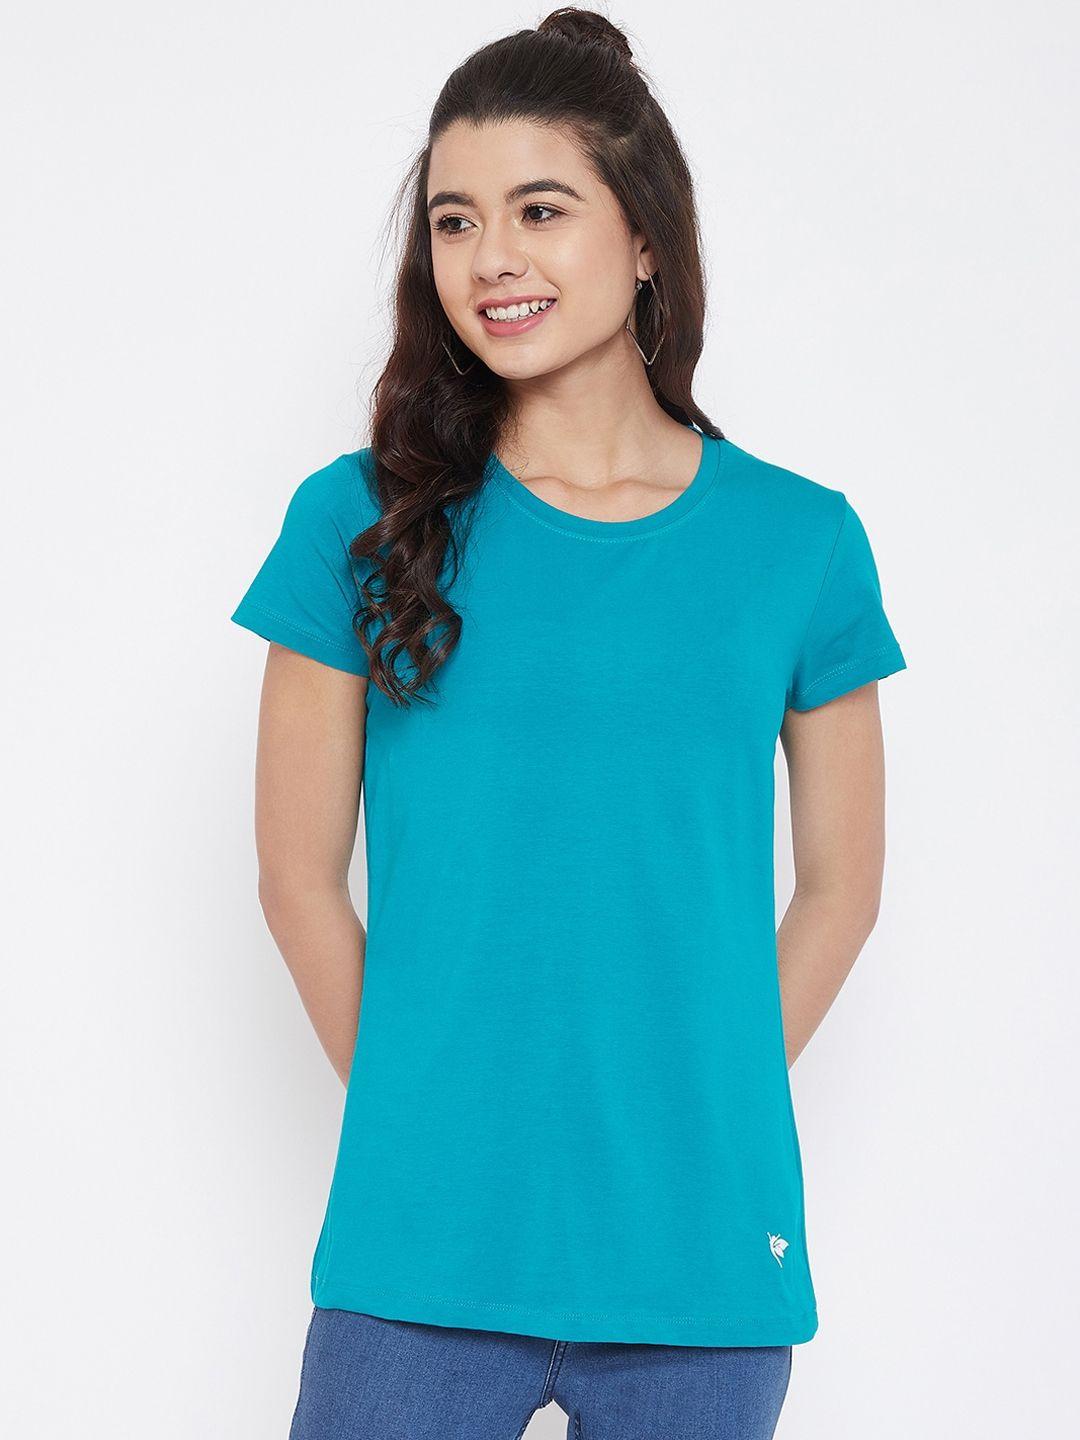 camey-women-teal-solid-round-neck-t-shirt